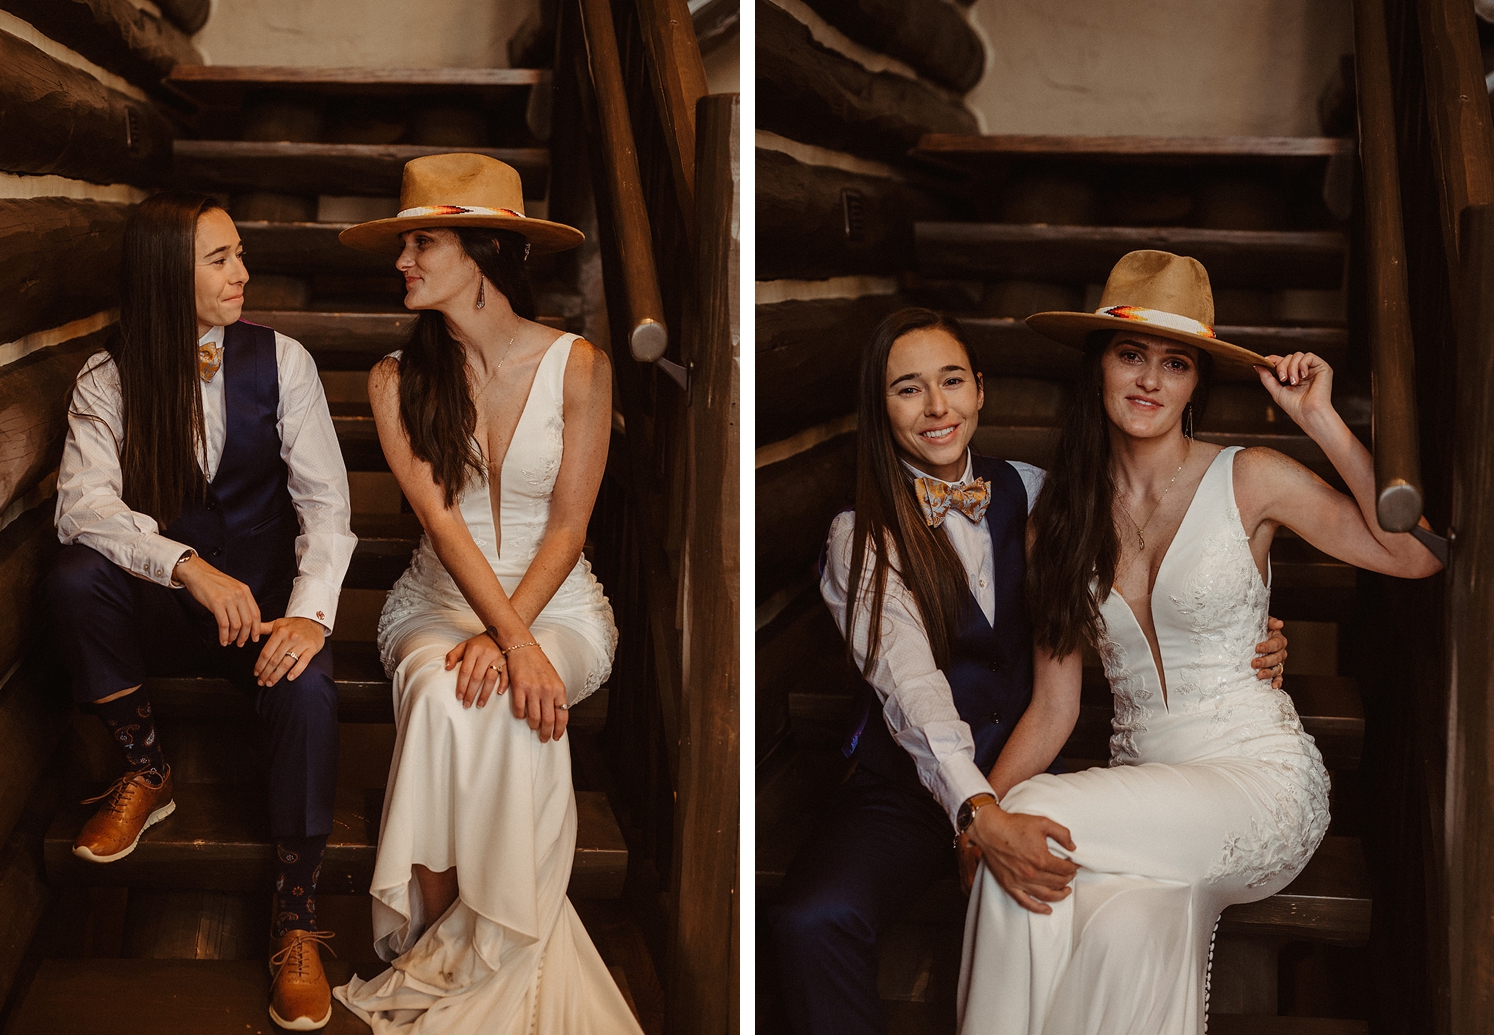 Partners sitting next to each other on stairs during couple's portraits | Partner wearing hat and wedding dress sitting next to partner on stairs during photos at Colorado Airbnb Wedding | McArthur Weddings and Events